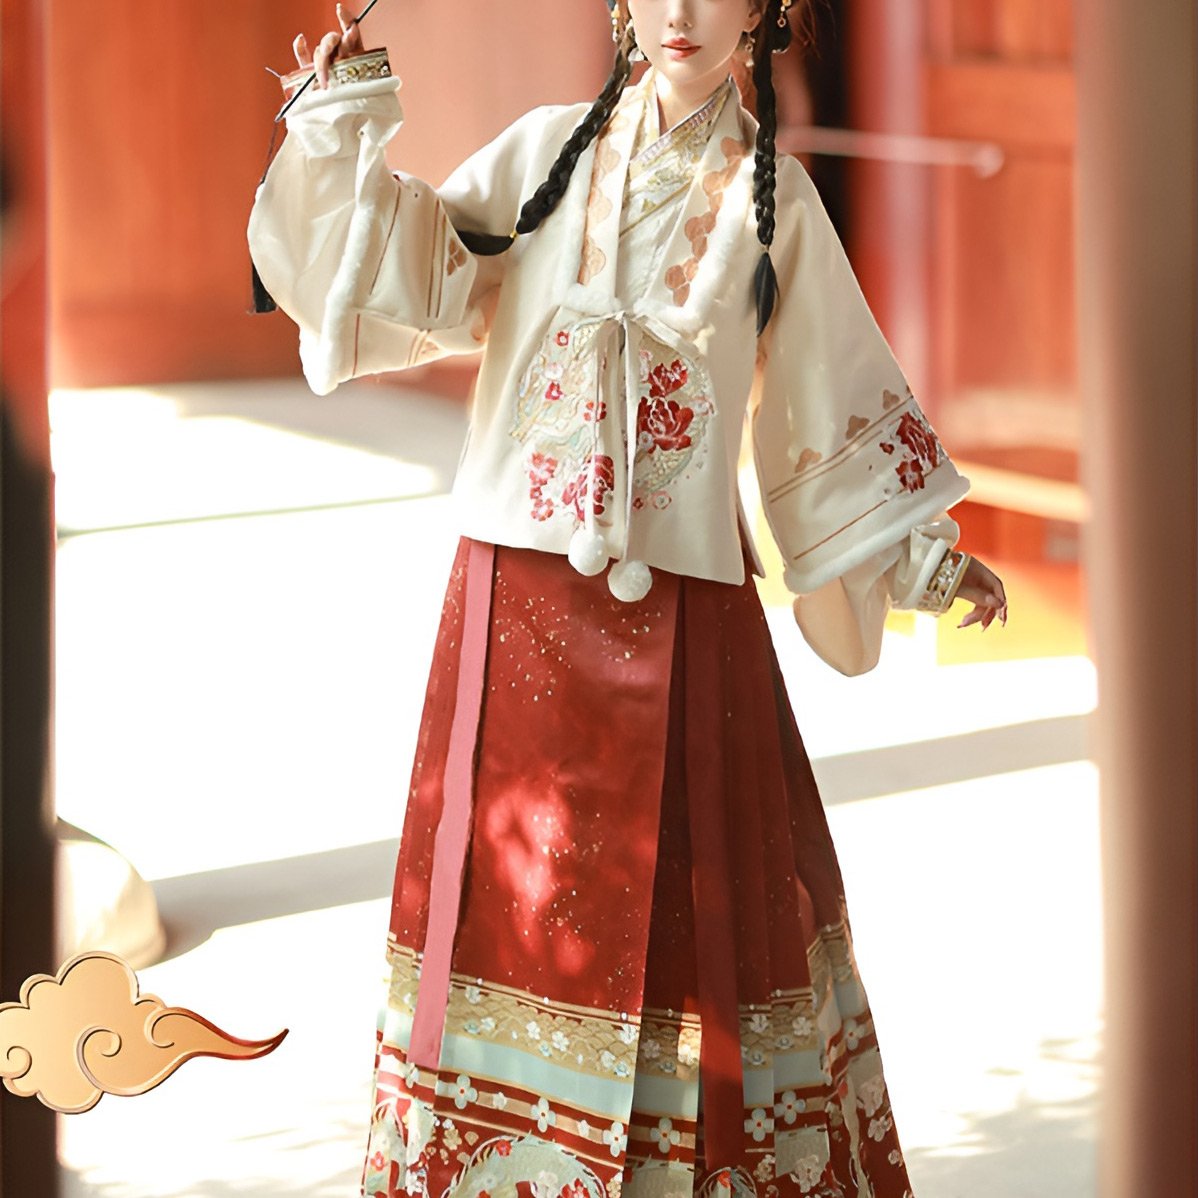 Evening Autumn Ming-Style Hanfu Dress with Rich Embroidery for Cooler Seasons